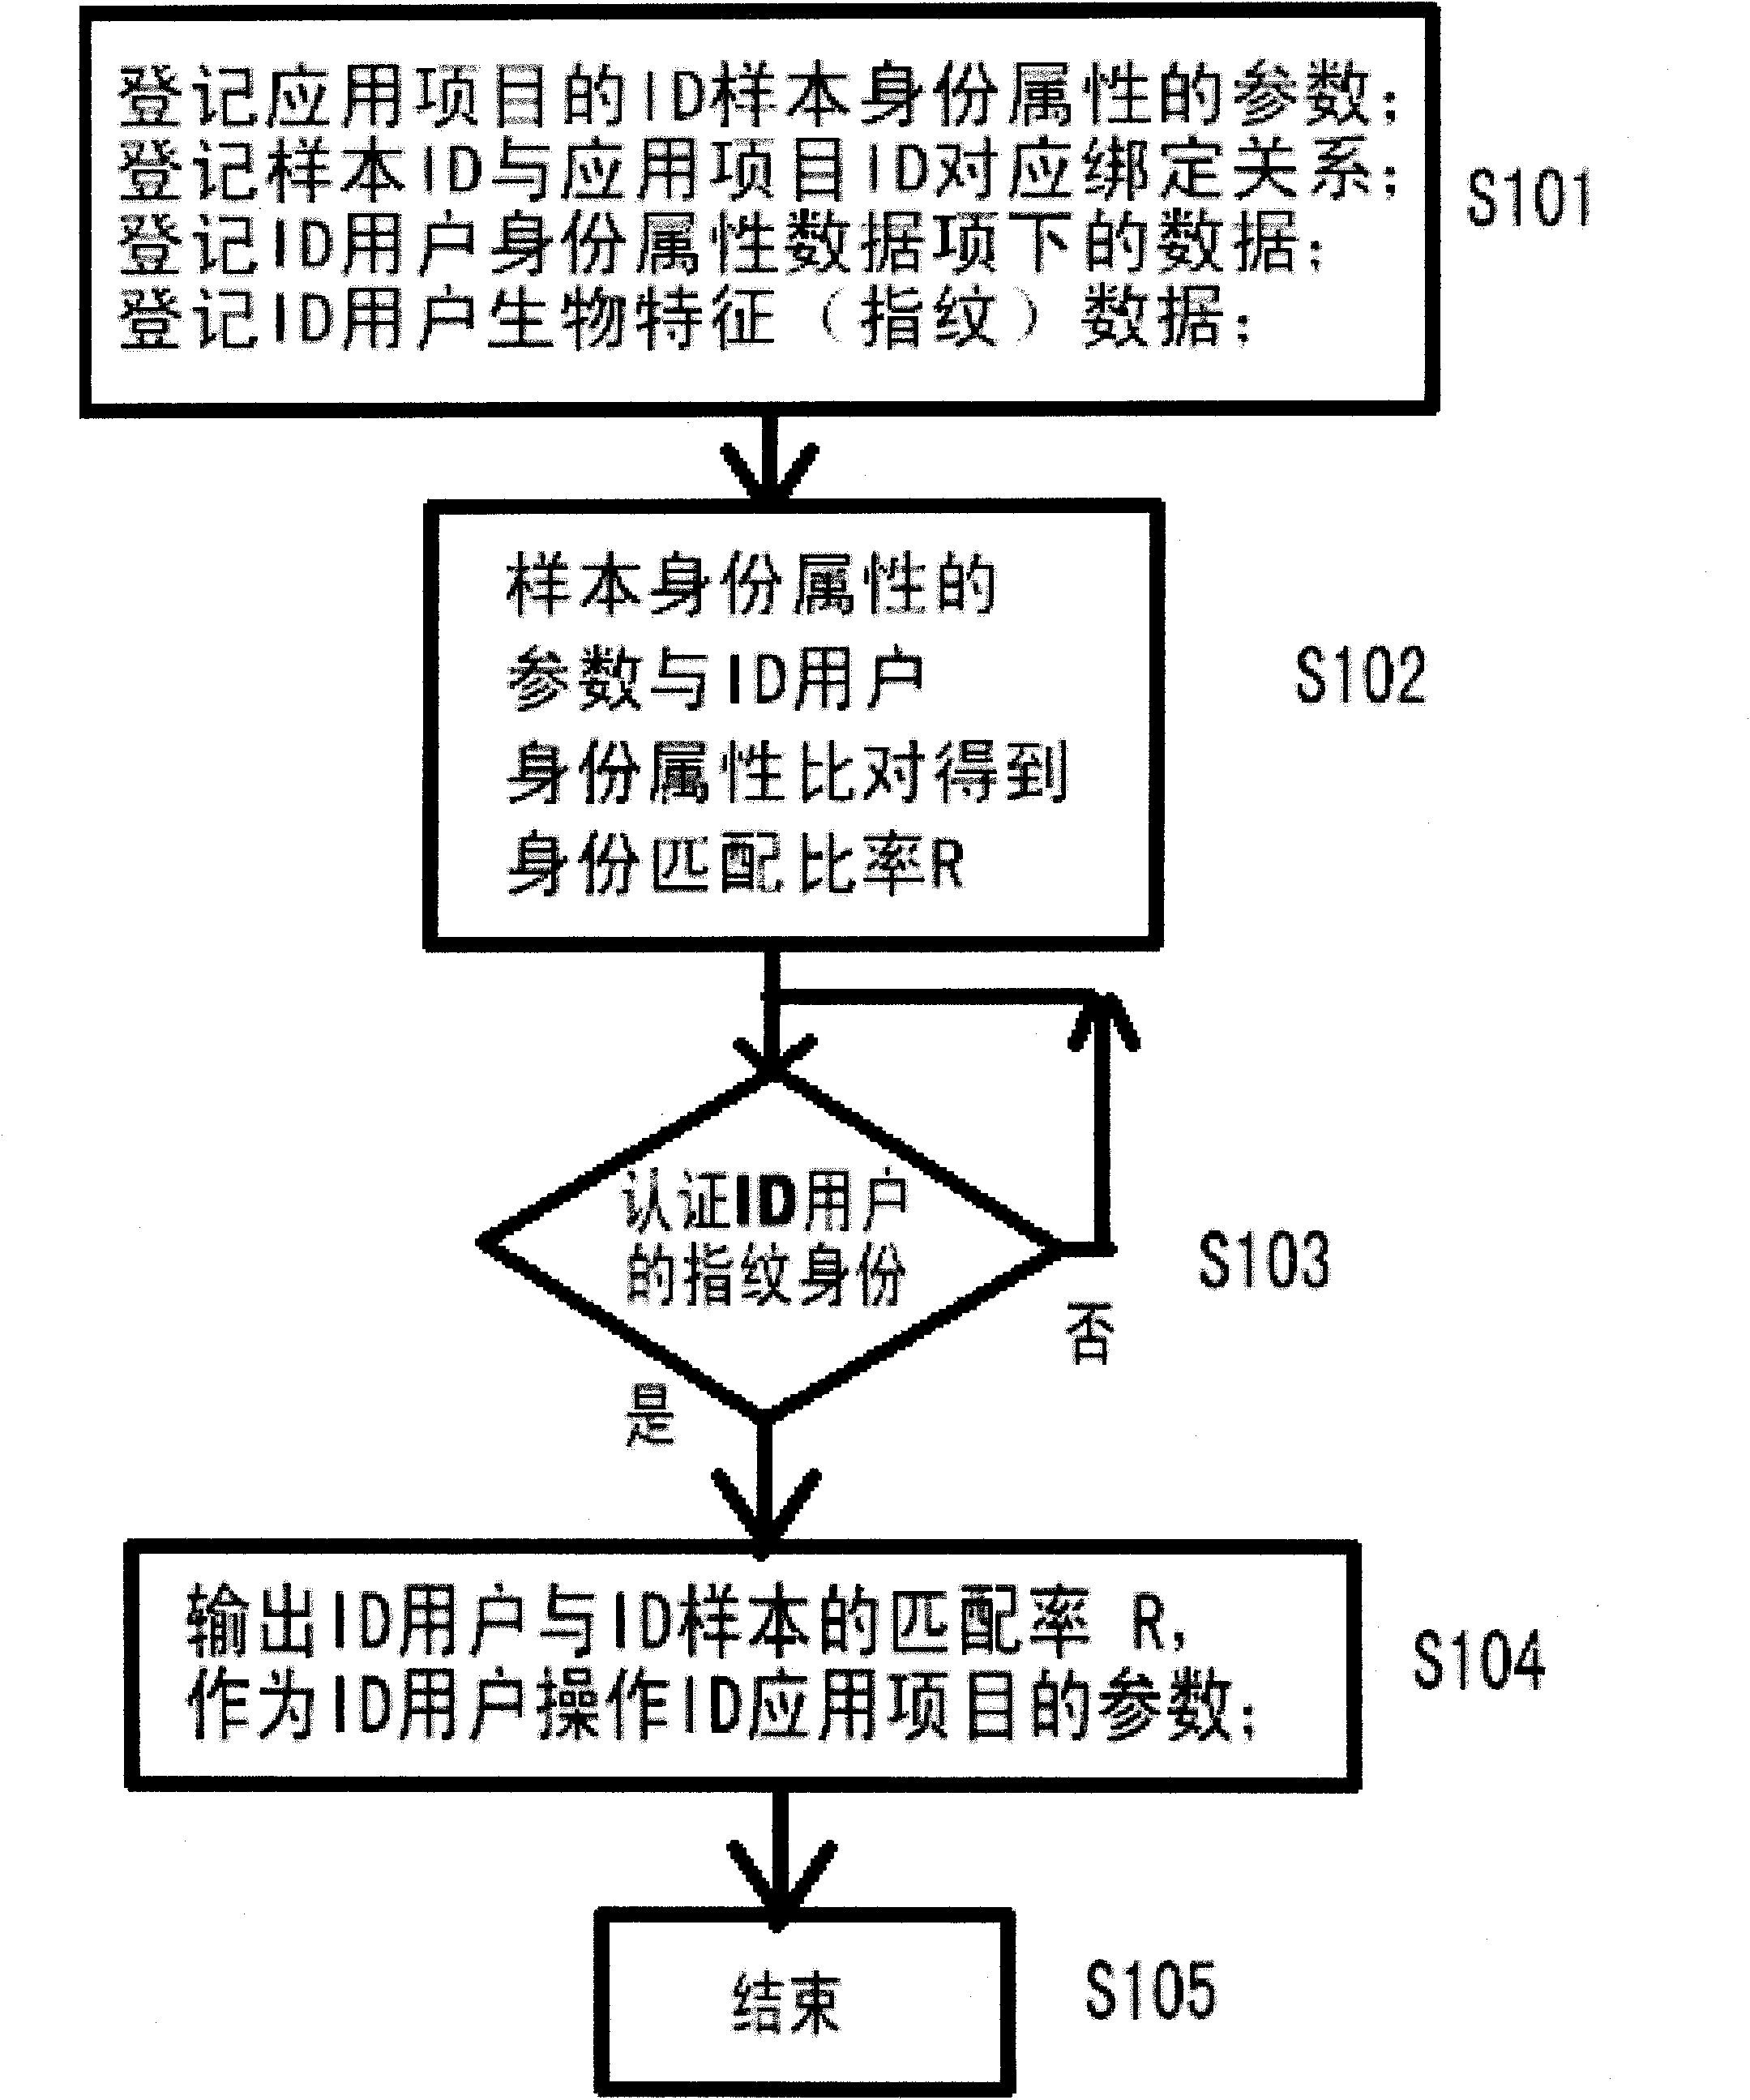 Method for matching and comparing user ID and ID matching system